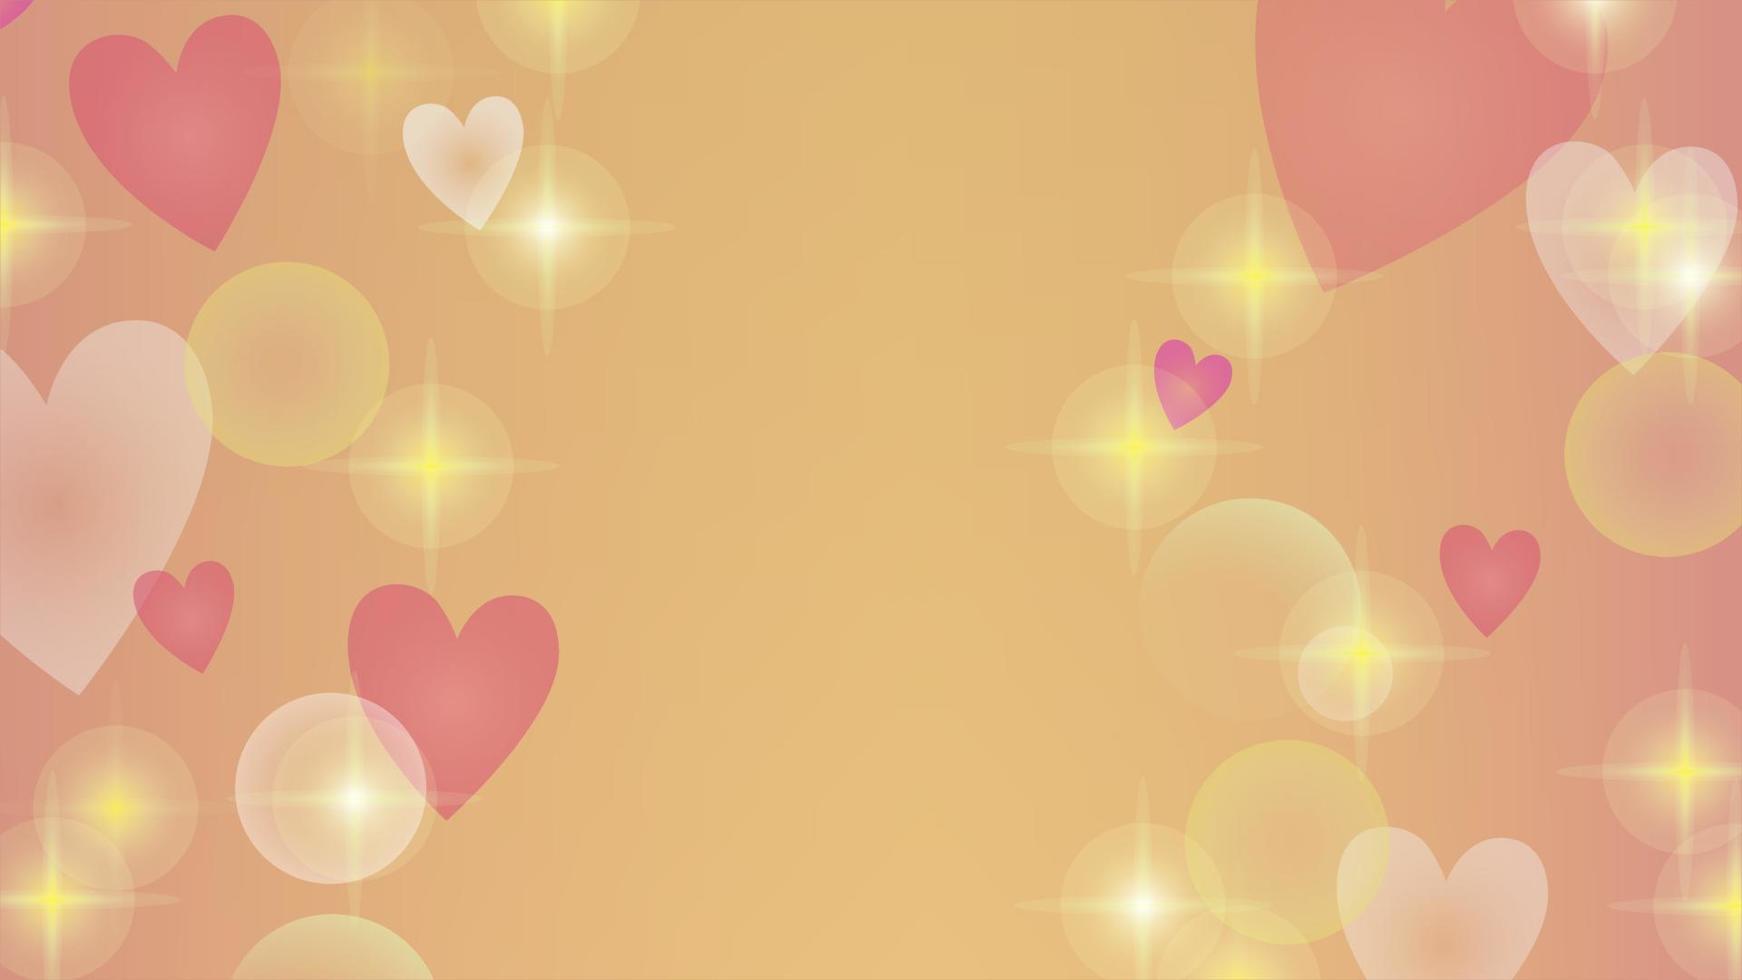 Warm sweet heart background for romantic love vector